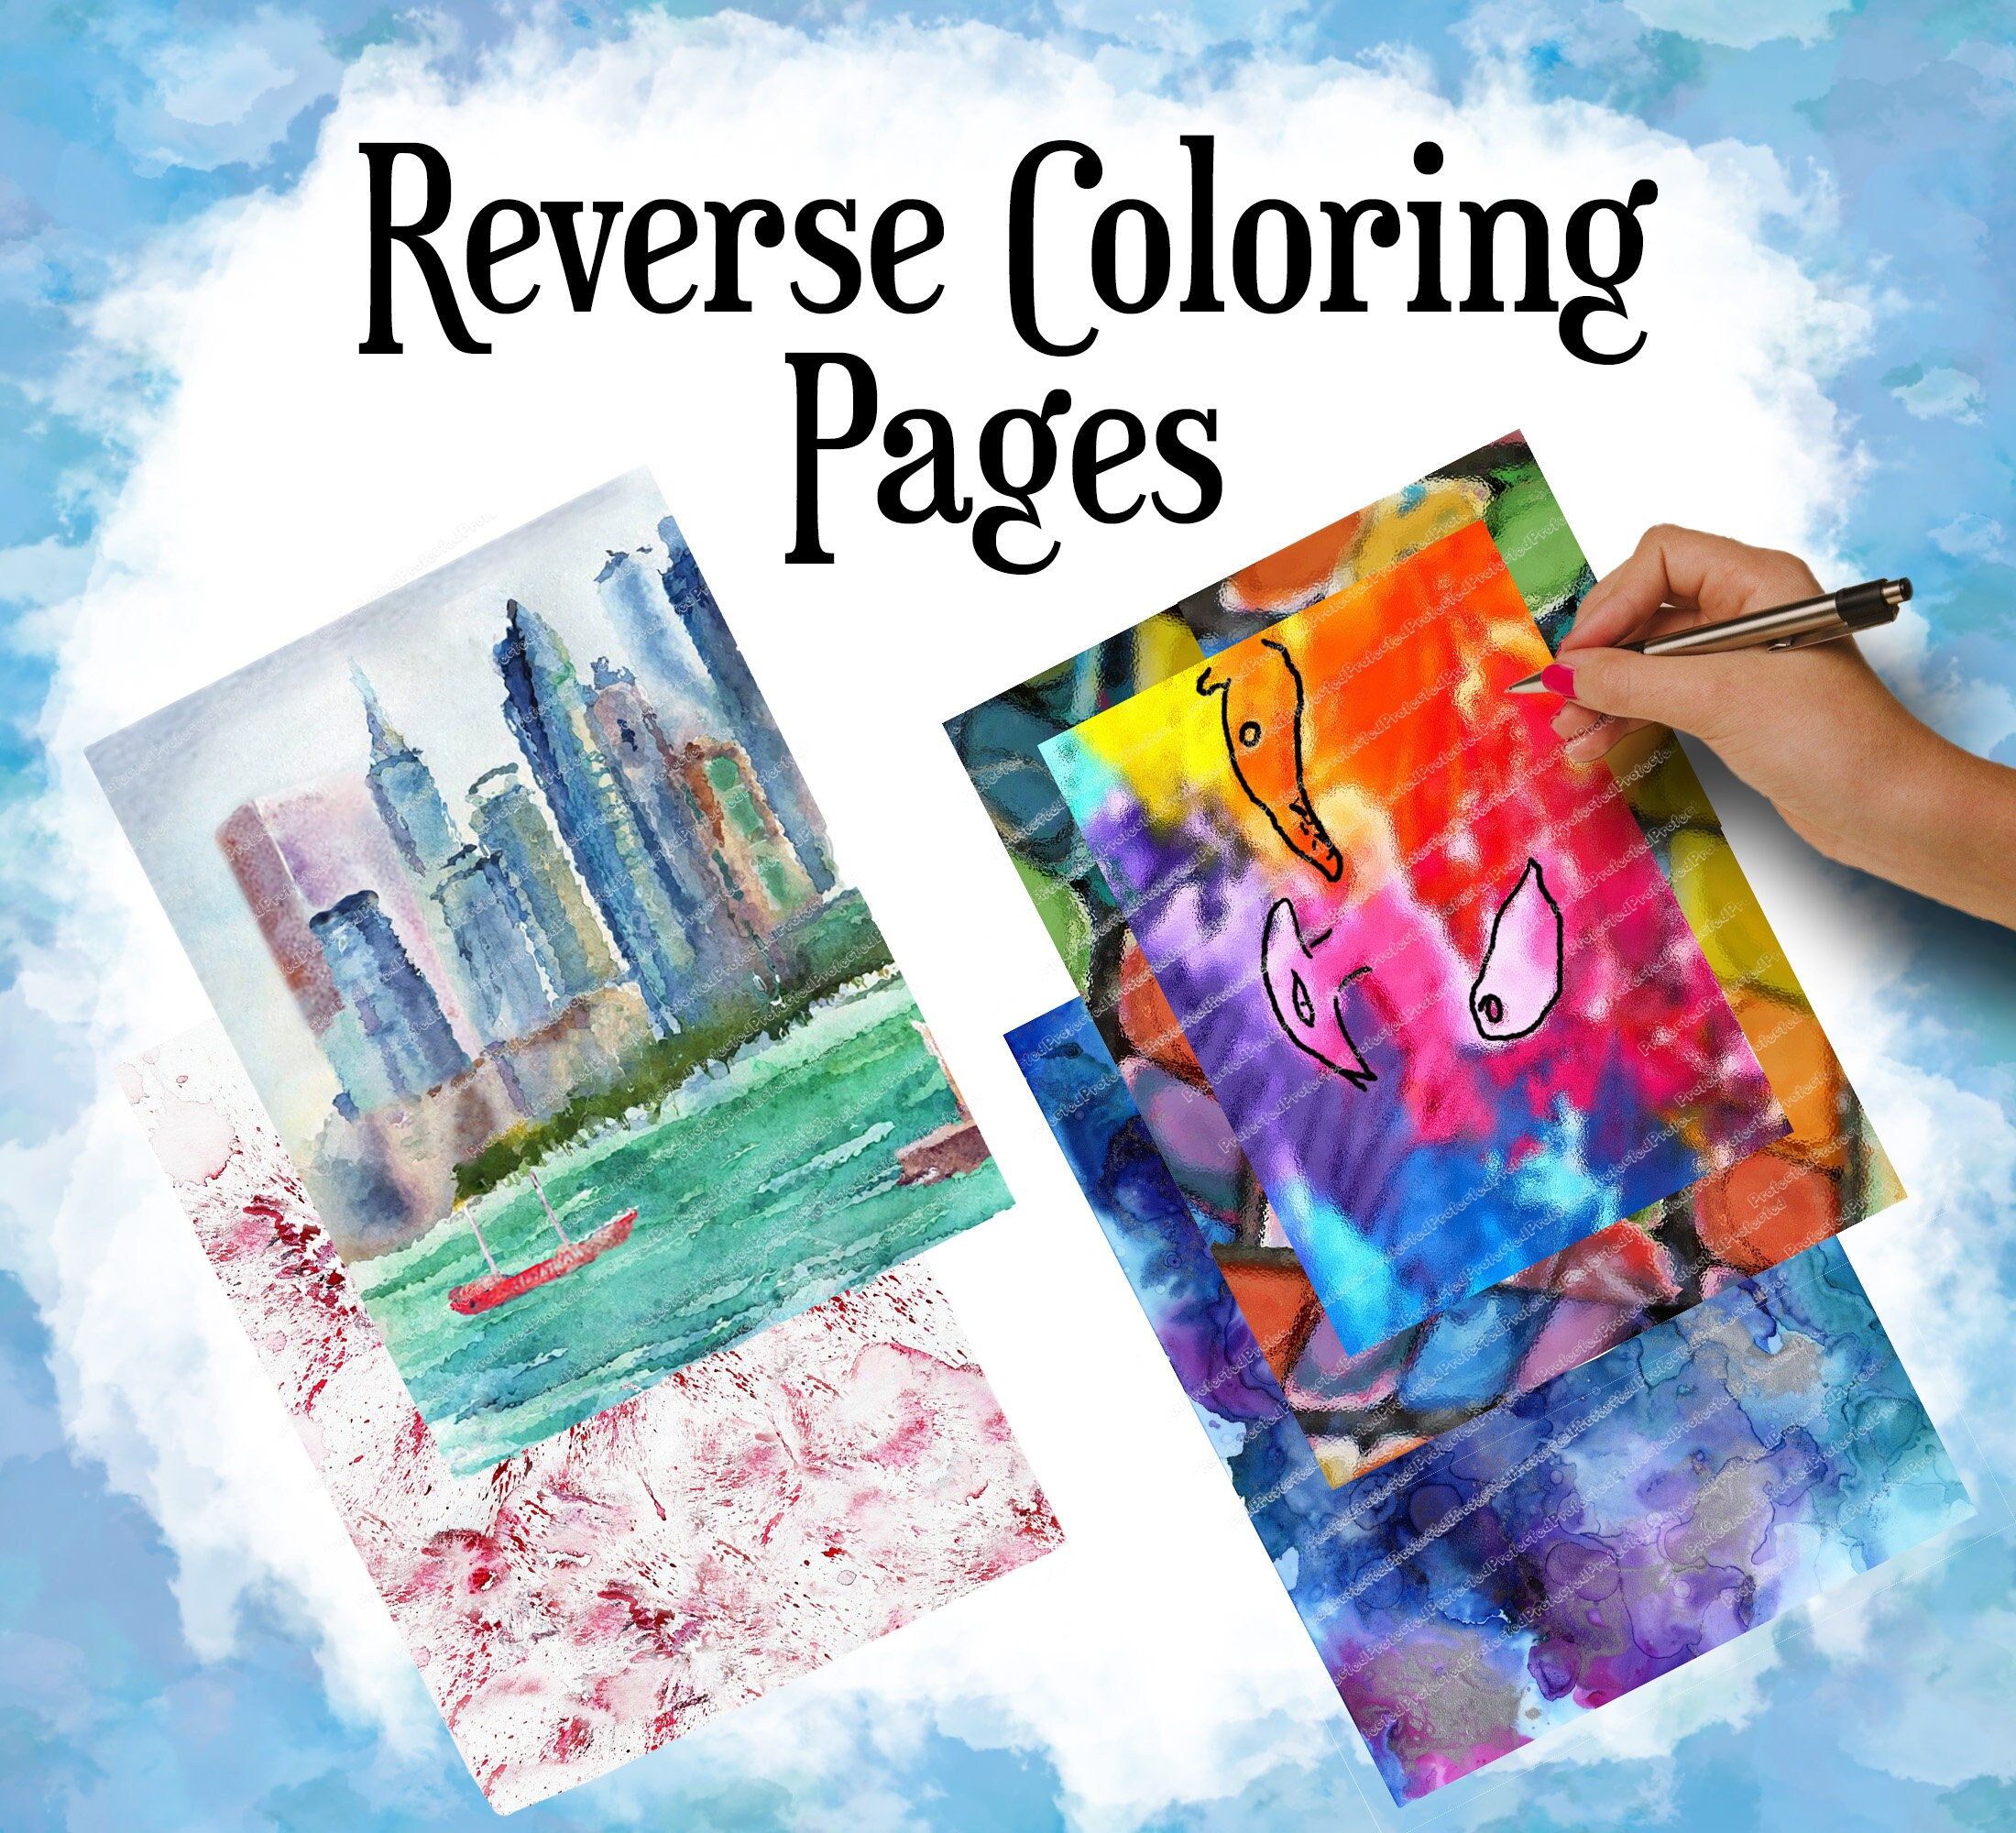 Reverse Coloring Book for Adults, Color in Reverse Style, Phygital Art,  Self Portrait Style Concept for Relaxation, Creativity, Journaling -  Science of Beauty - A Scientific Education Network by Dr. Teo Wan Lin